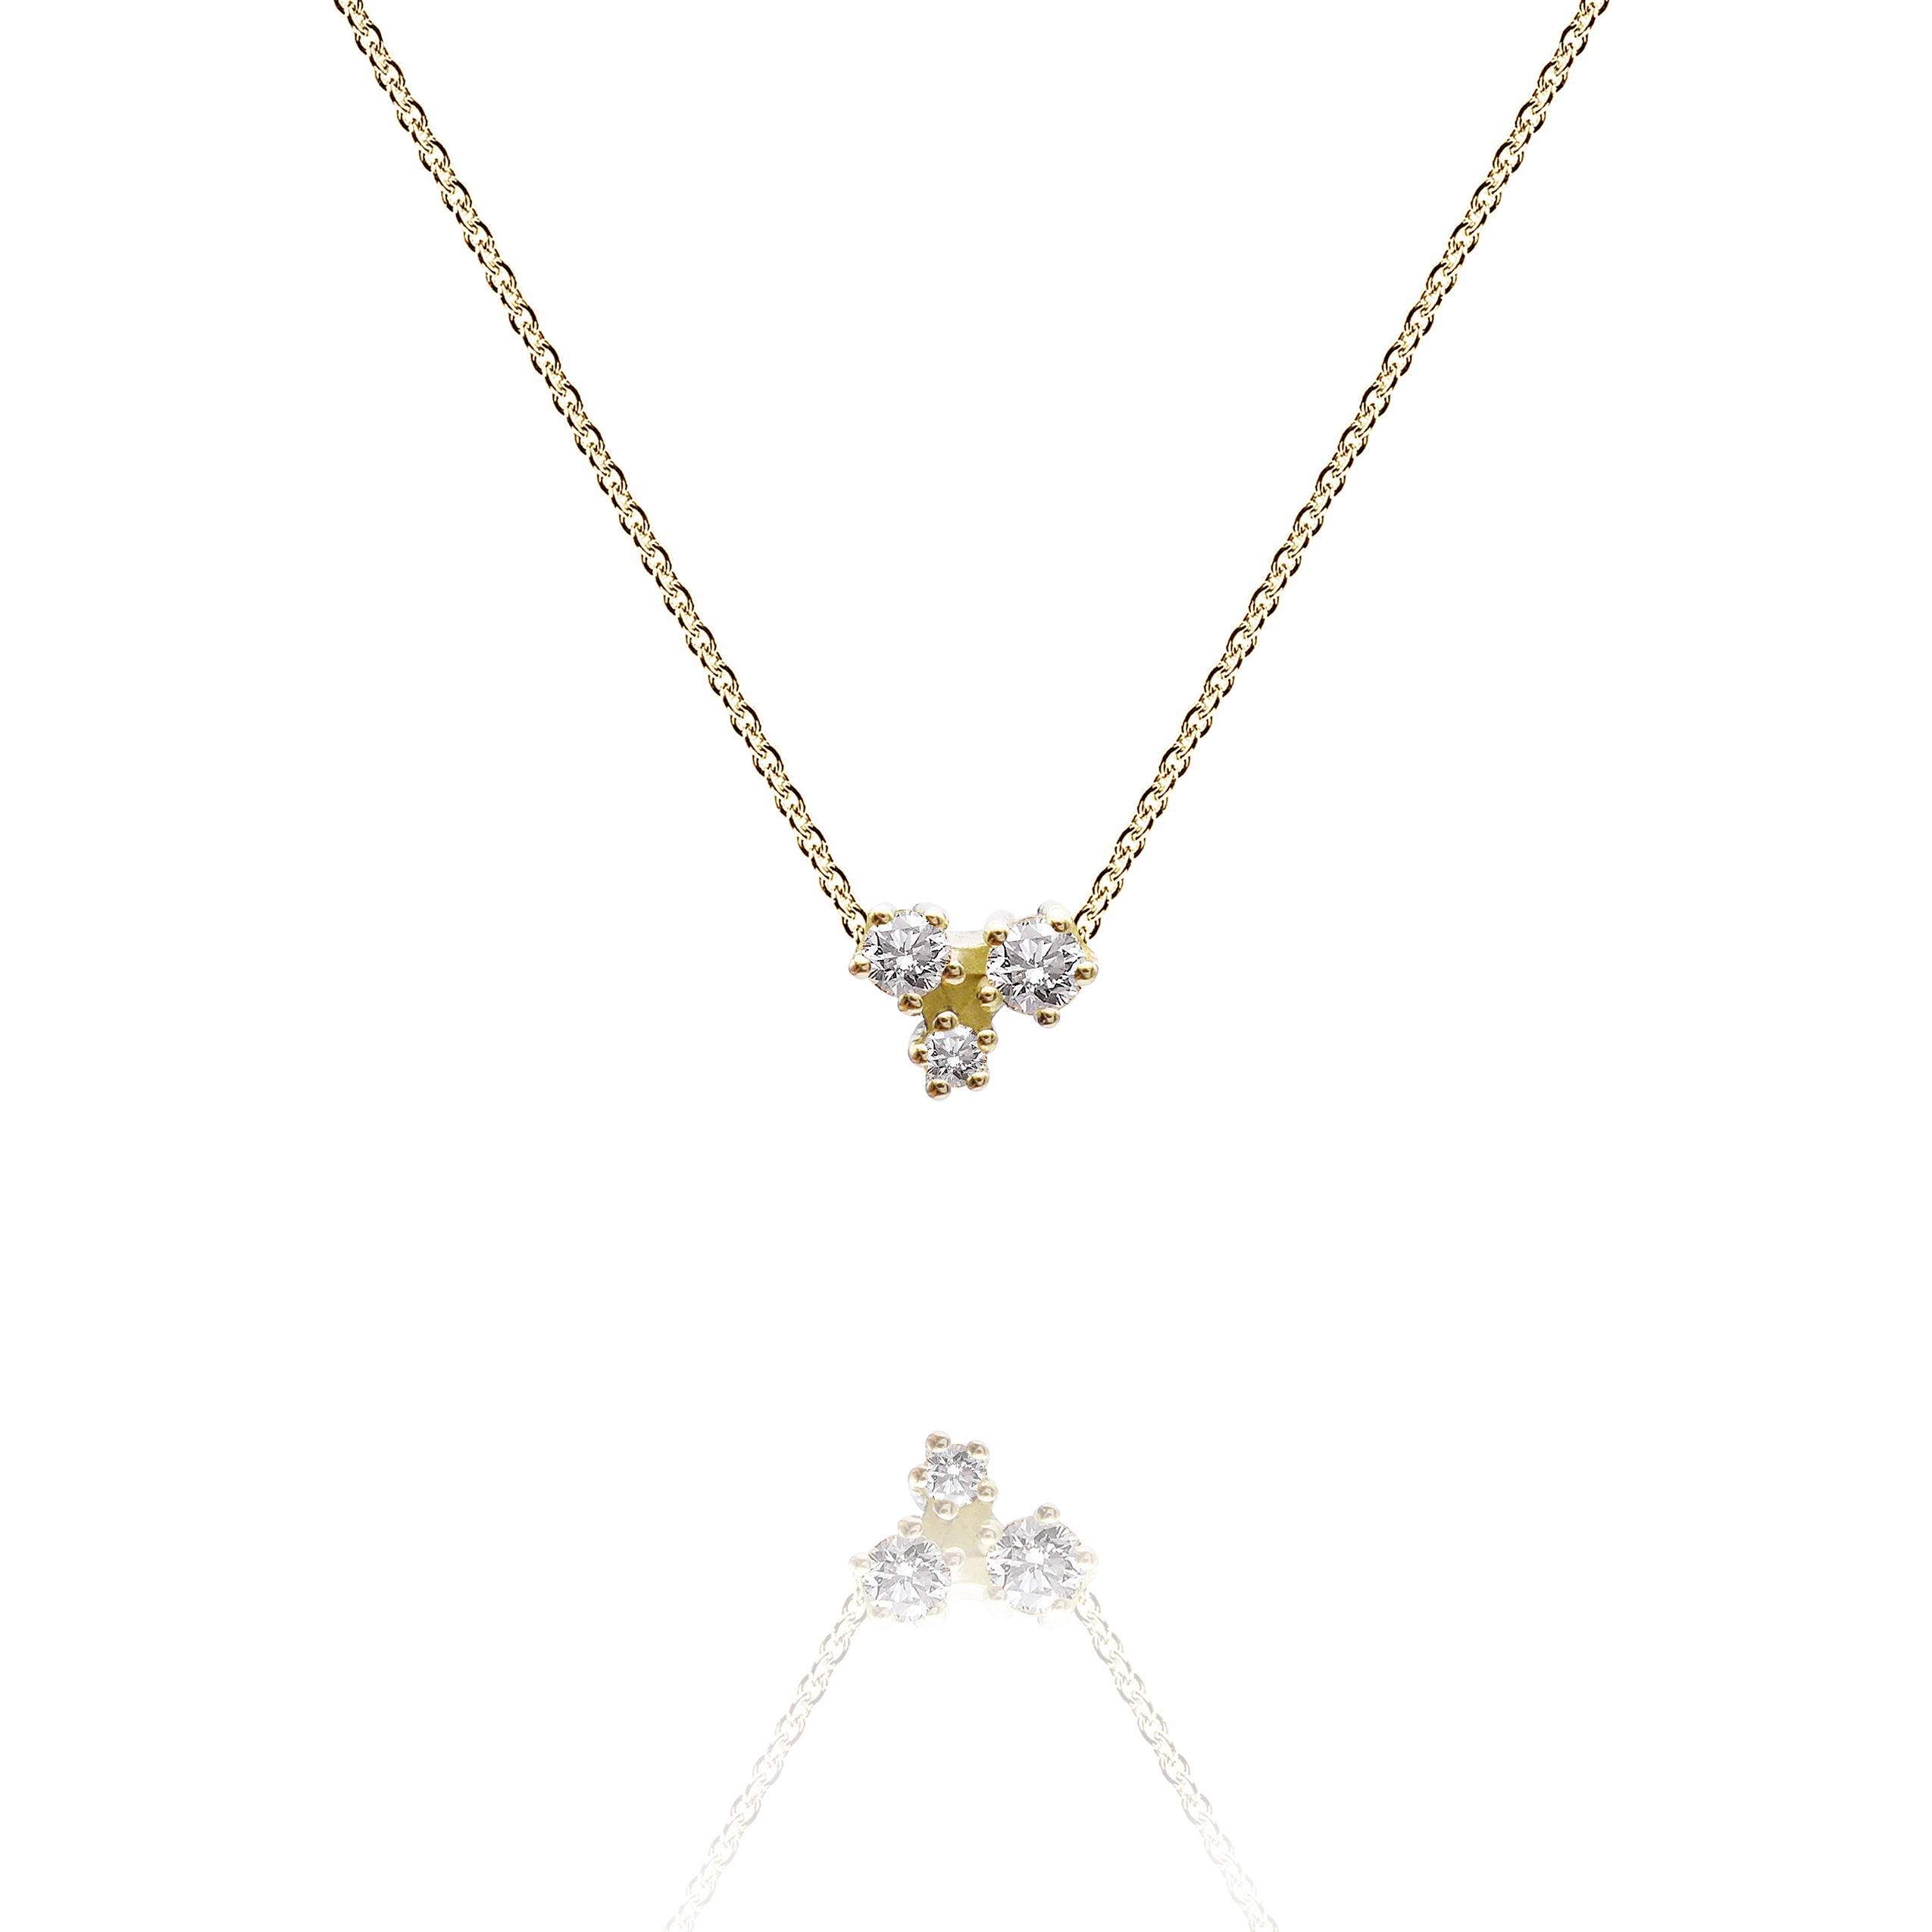 Sparkle pendant "smal" in 585 gold with diamonds